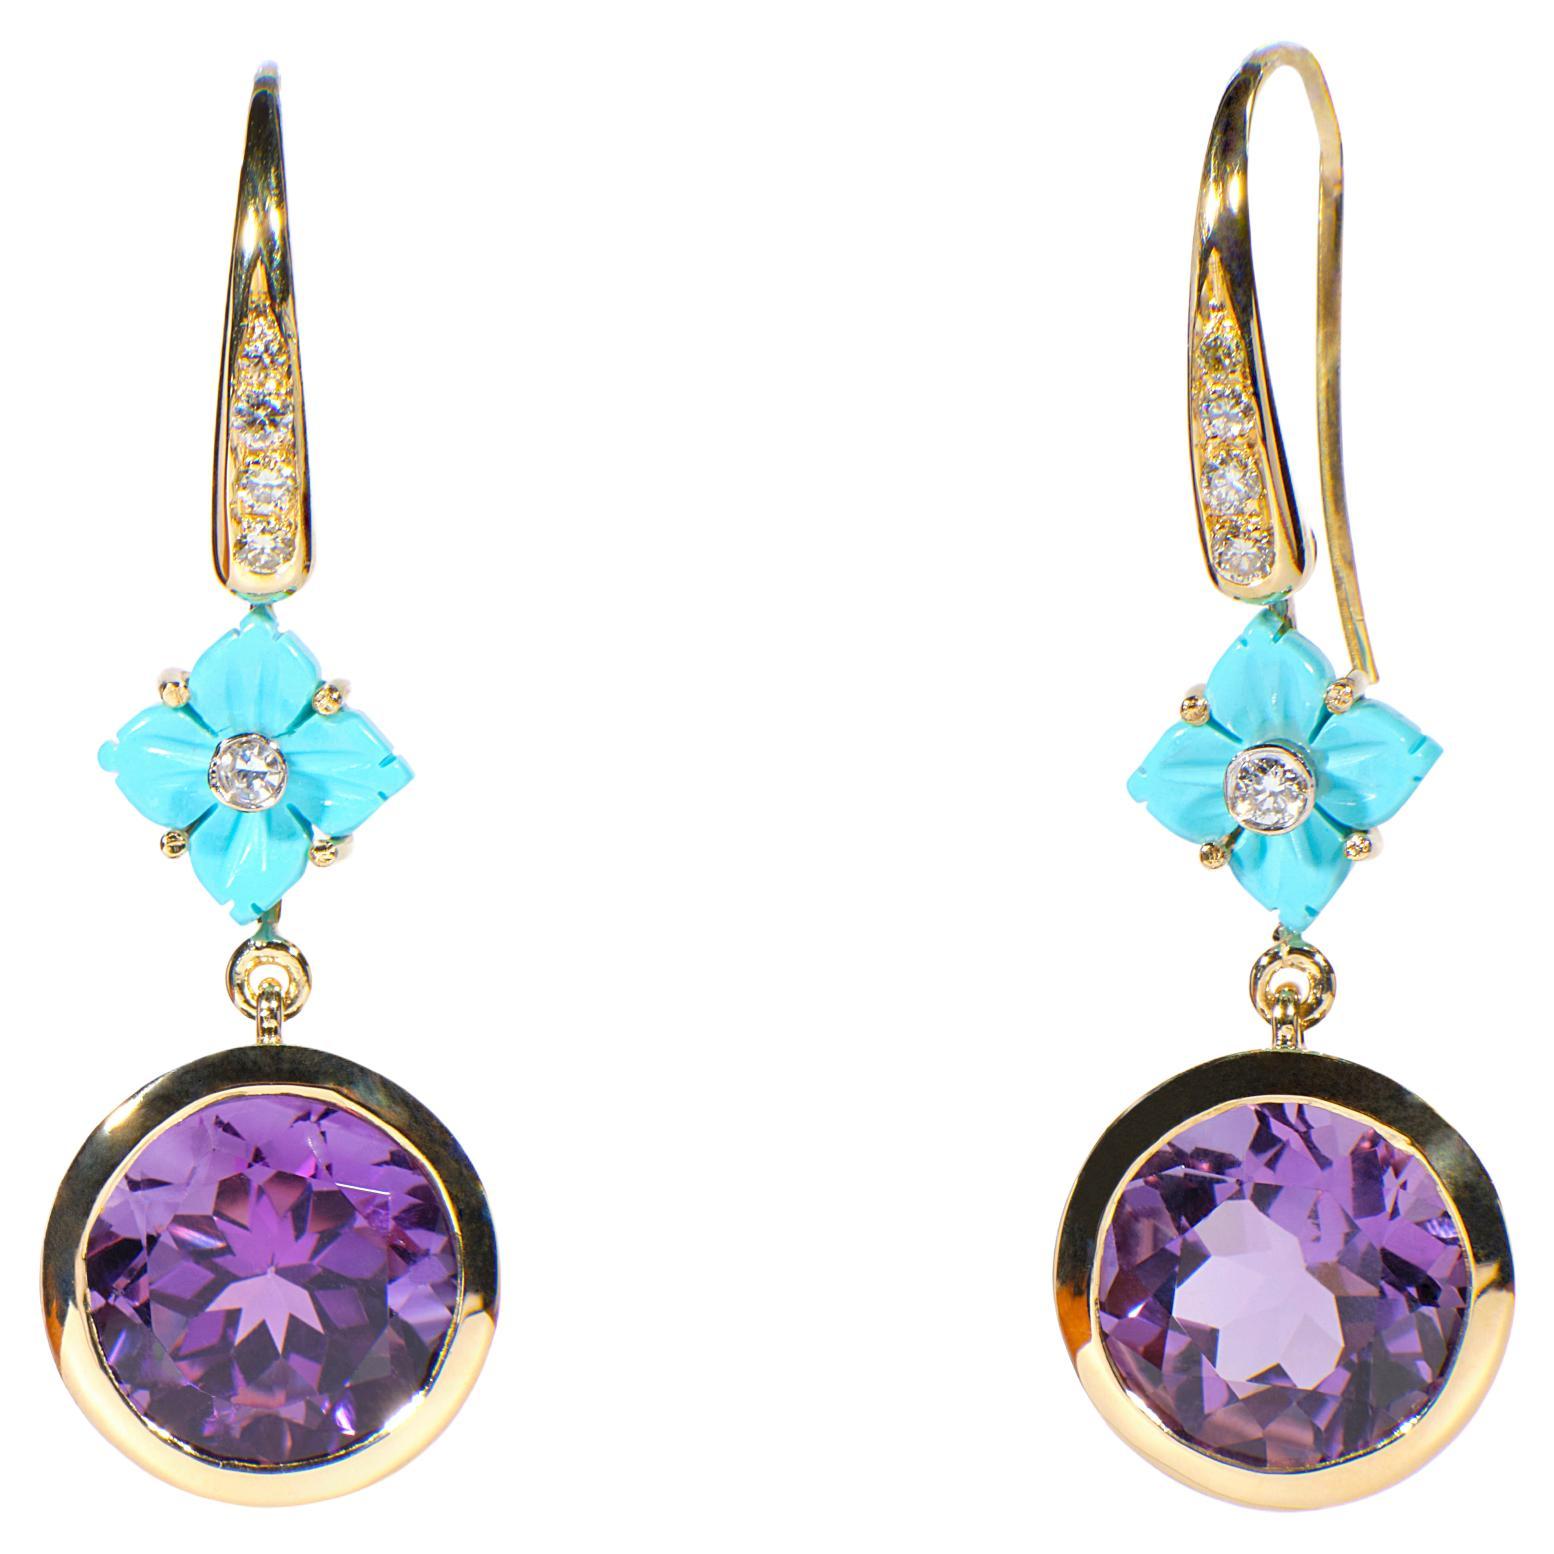 Unique 18k Gold Earrings Turquoise Flower Amethyst Diamonds Handcrafted in Italy